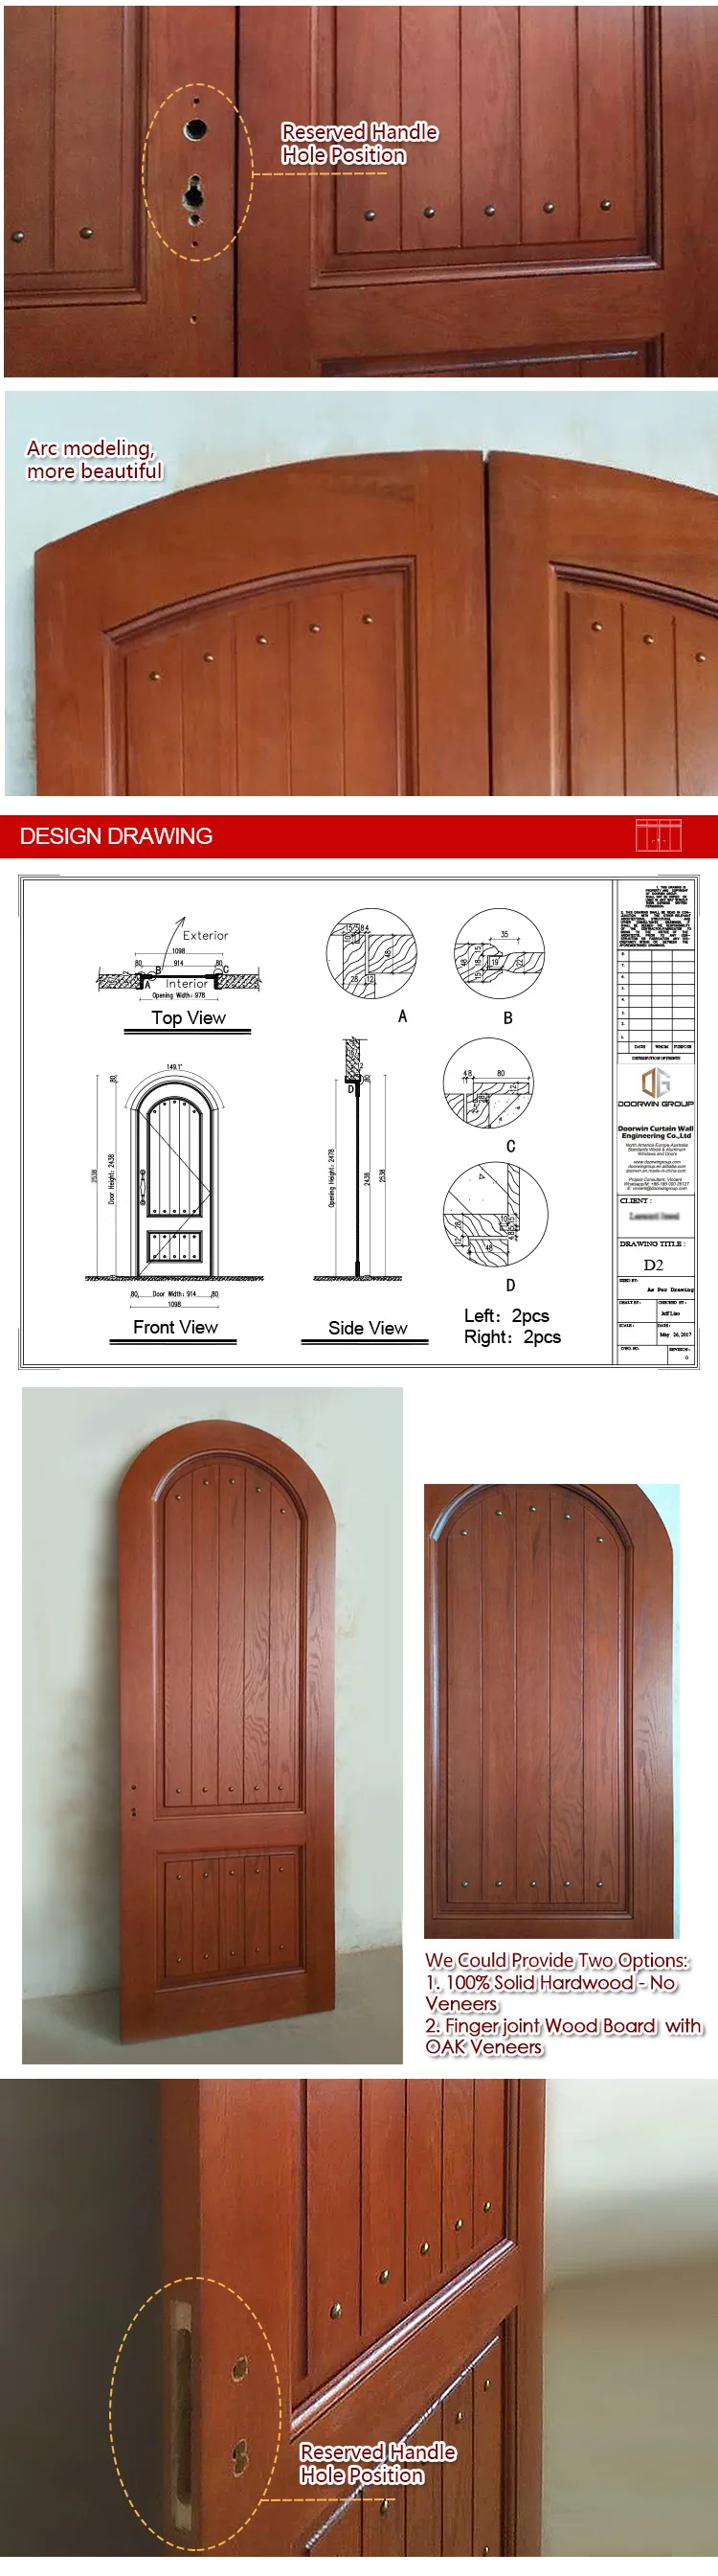 Manufacture direct Vintage and  top quantity import red oak wood double entry main door design cheap house door